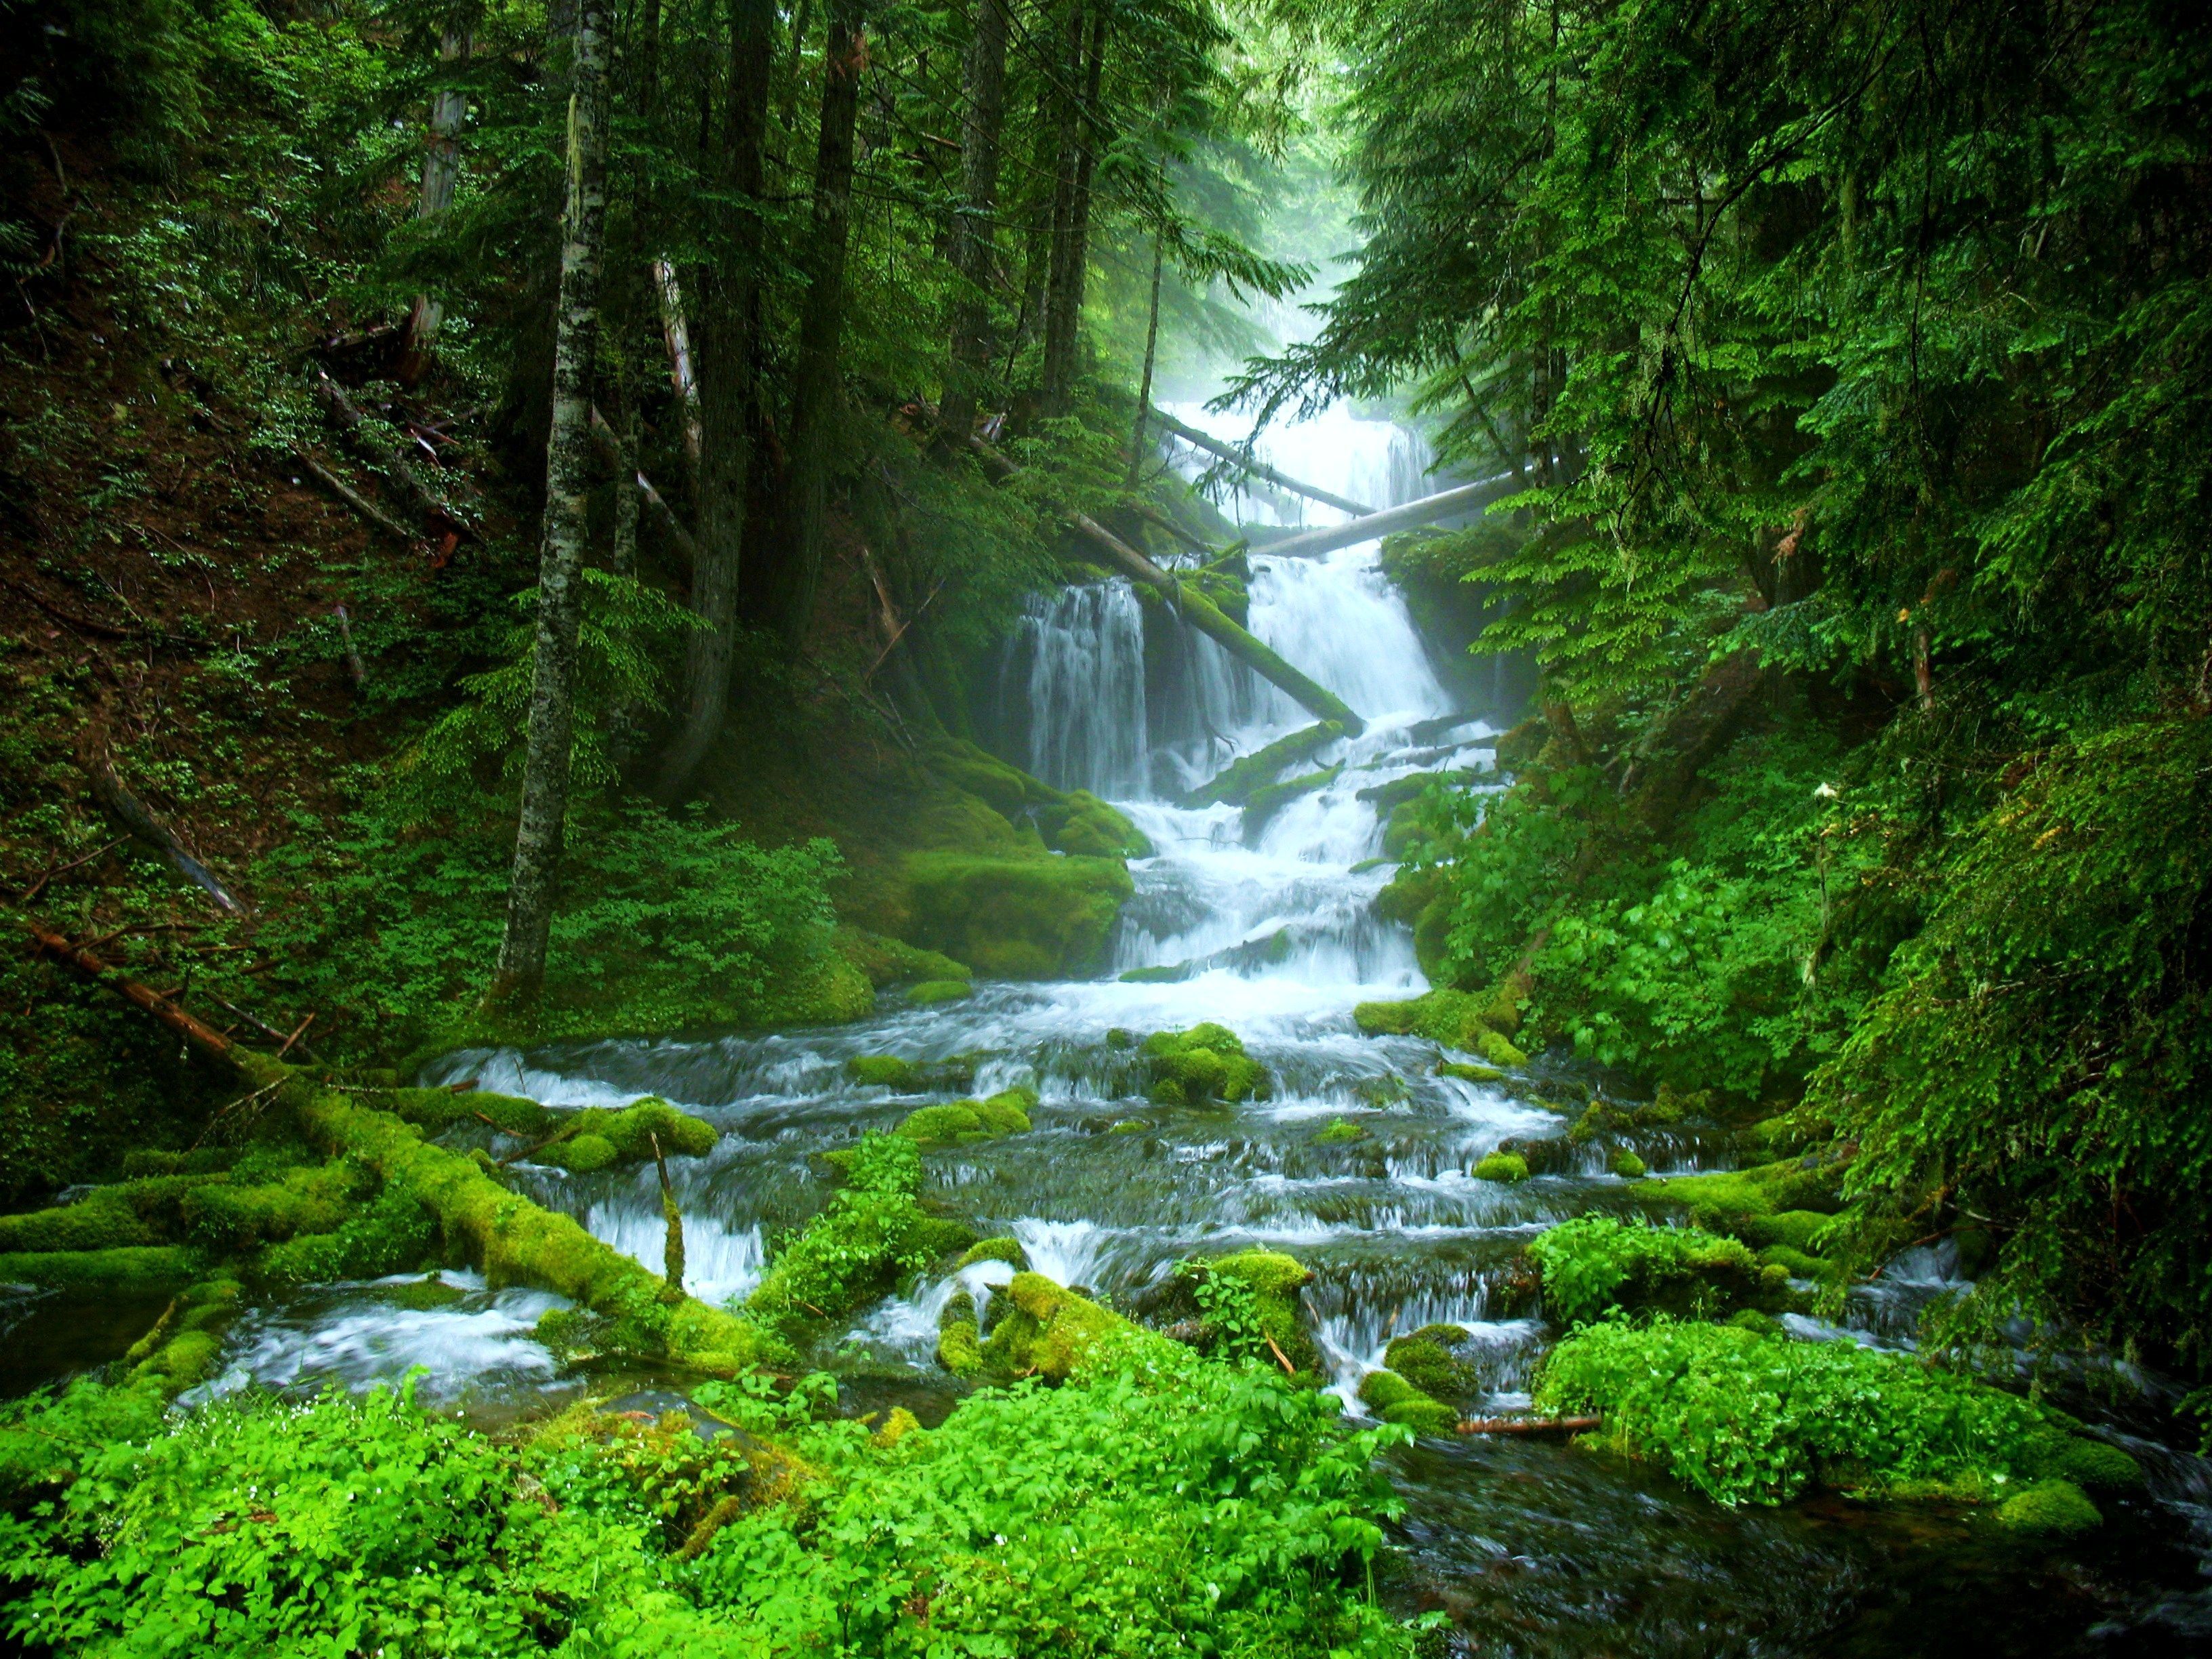 Of stream beautiful forest green nature water waterfall wallpaper. Waterfall wallpaper, Forest waterfall, Waterfall